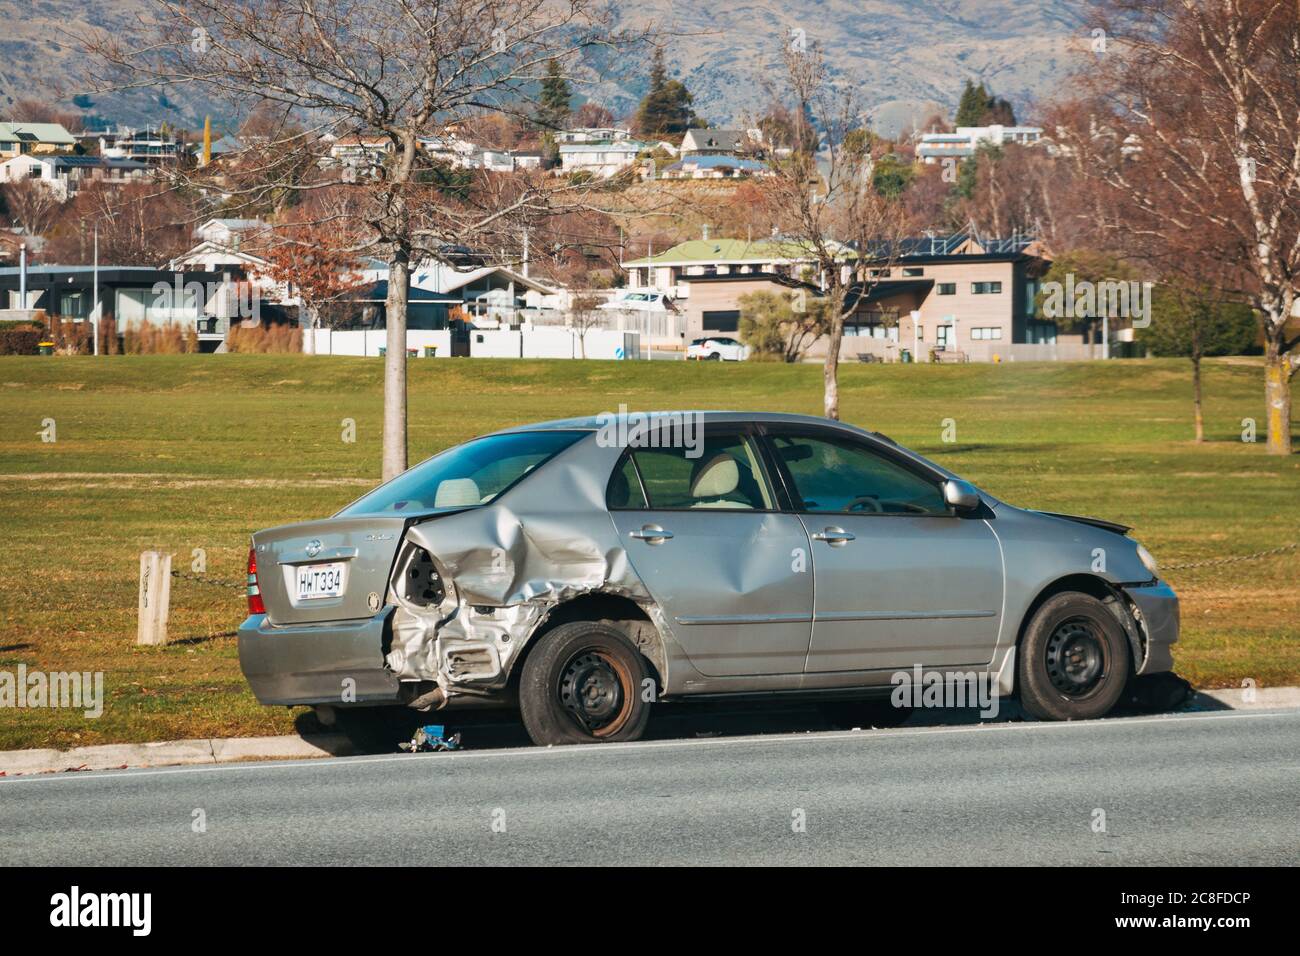 A wrecked car parked on the side of the road in Wanaka township, New Zealand, after it crashed and rolled over Stock Photo